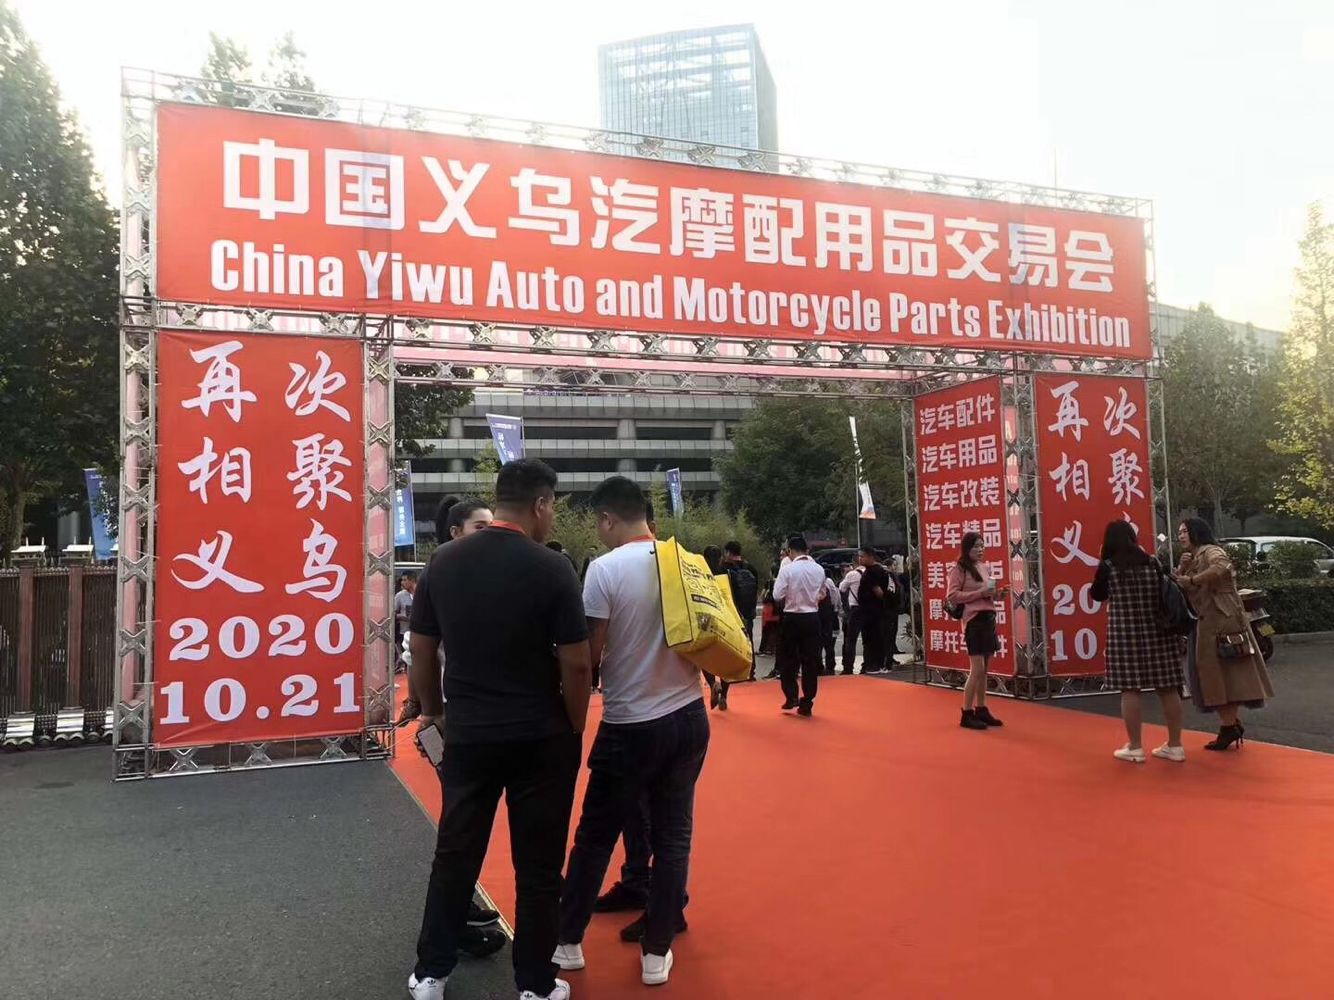 China Yiwu Auto and Motorcycle Parts Exhibition